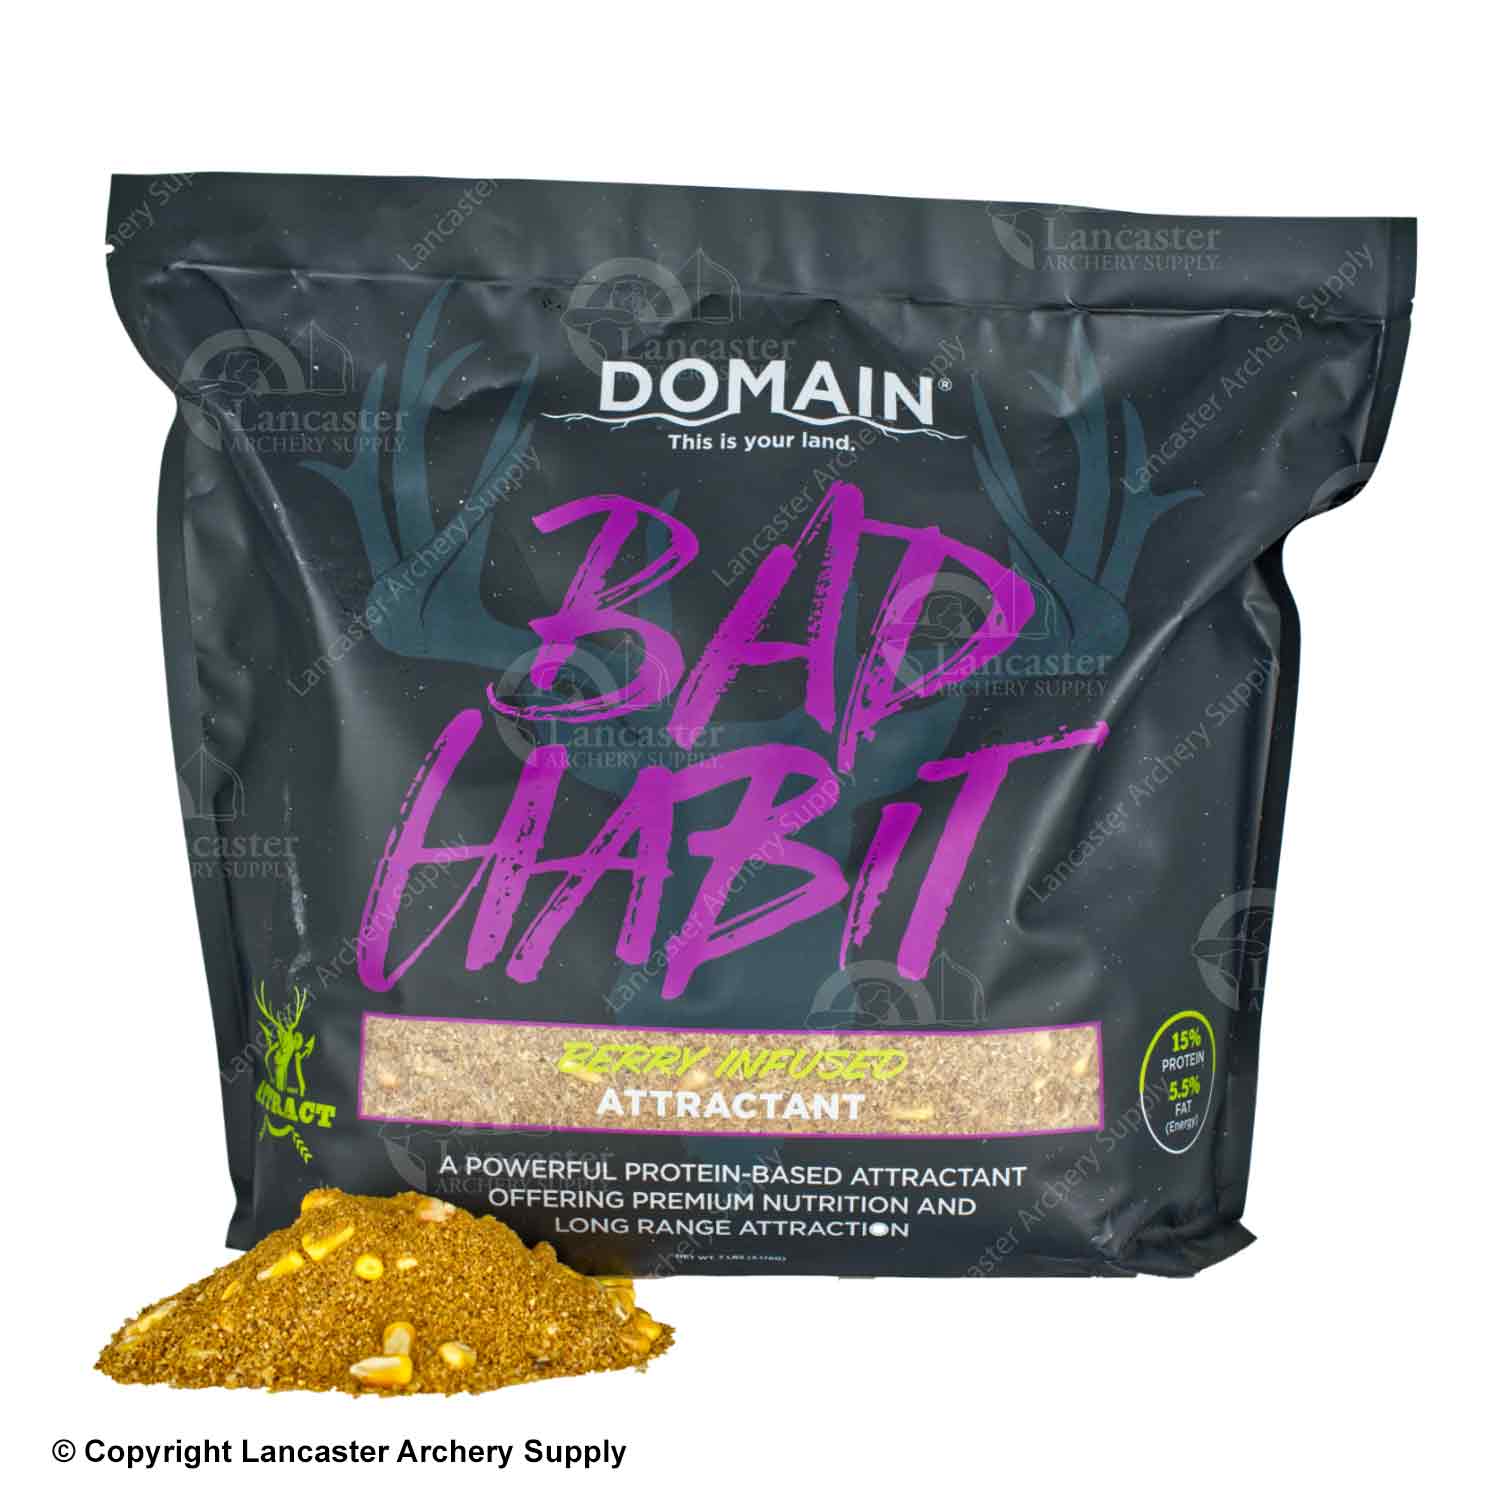 Domain Bad Habit Protein Based Attractant